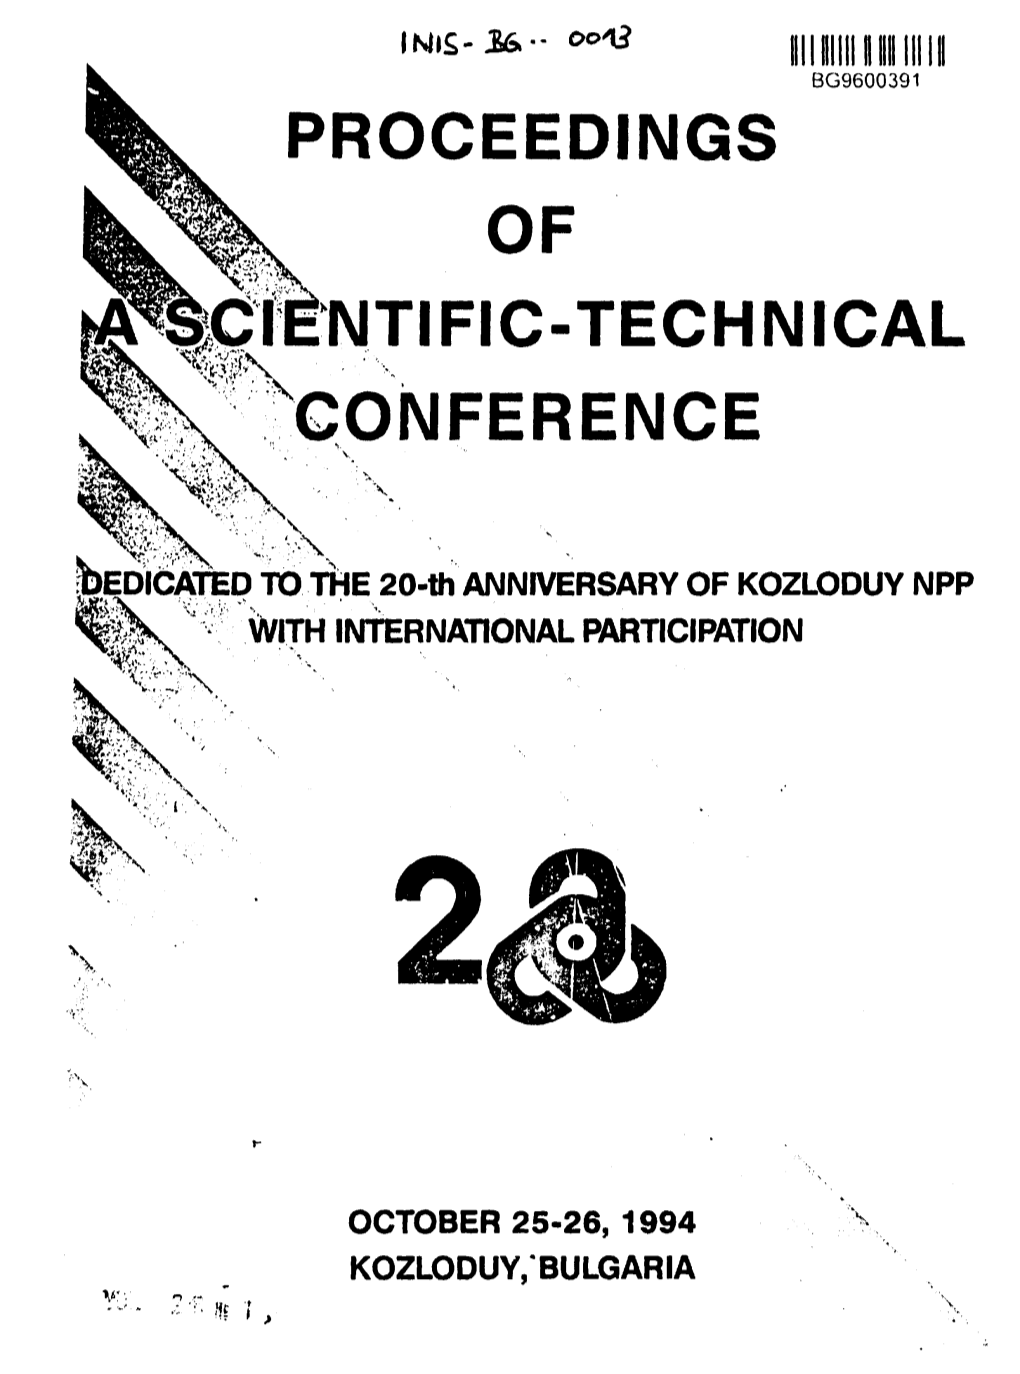 Proceedings of Ntific-Technical Conference